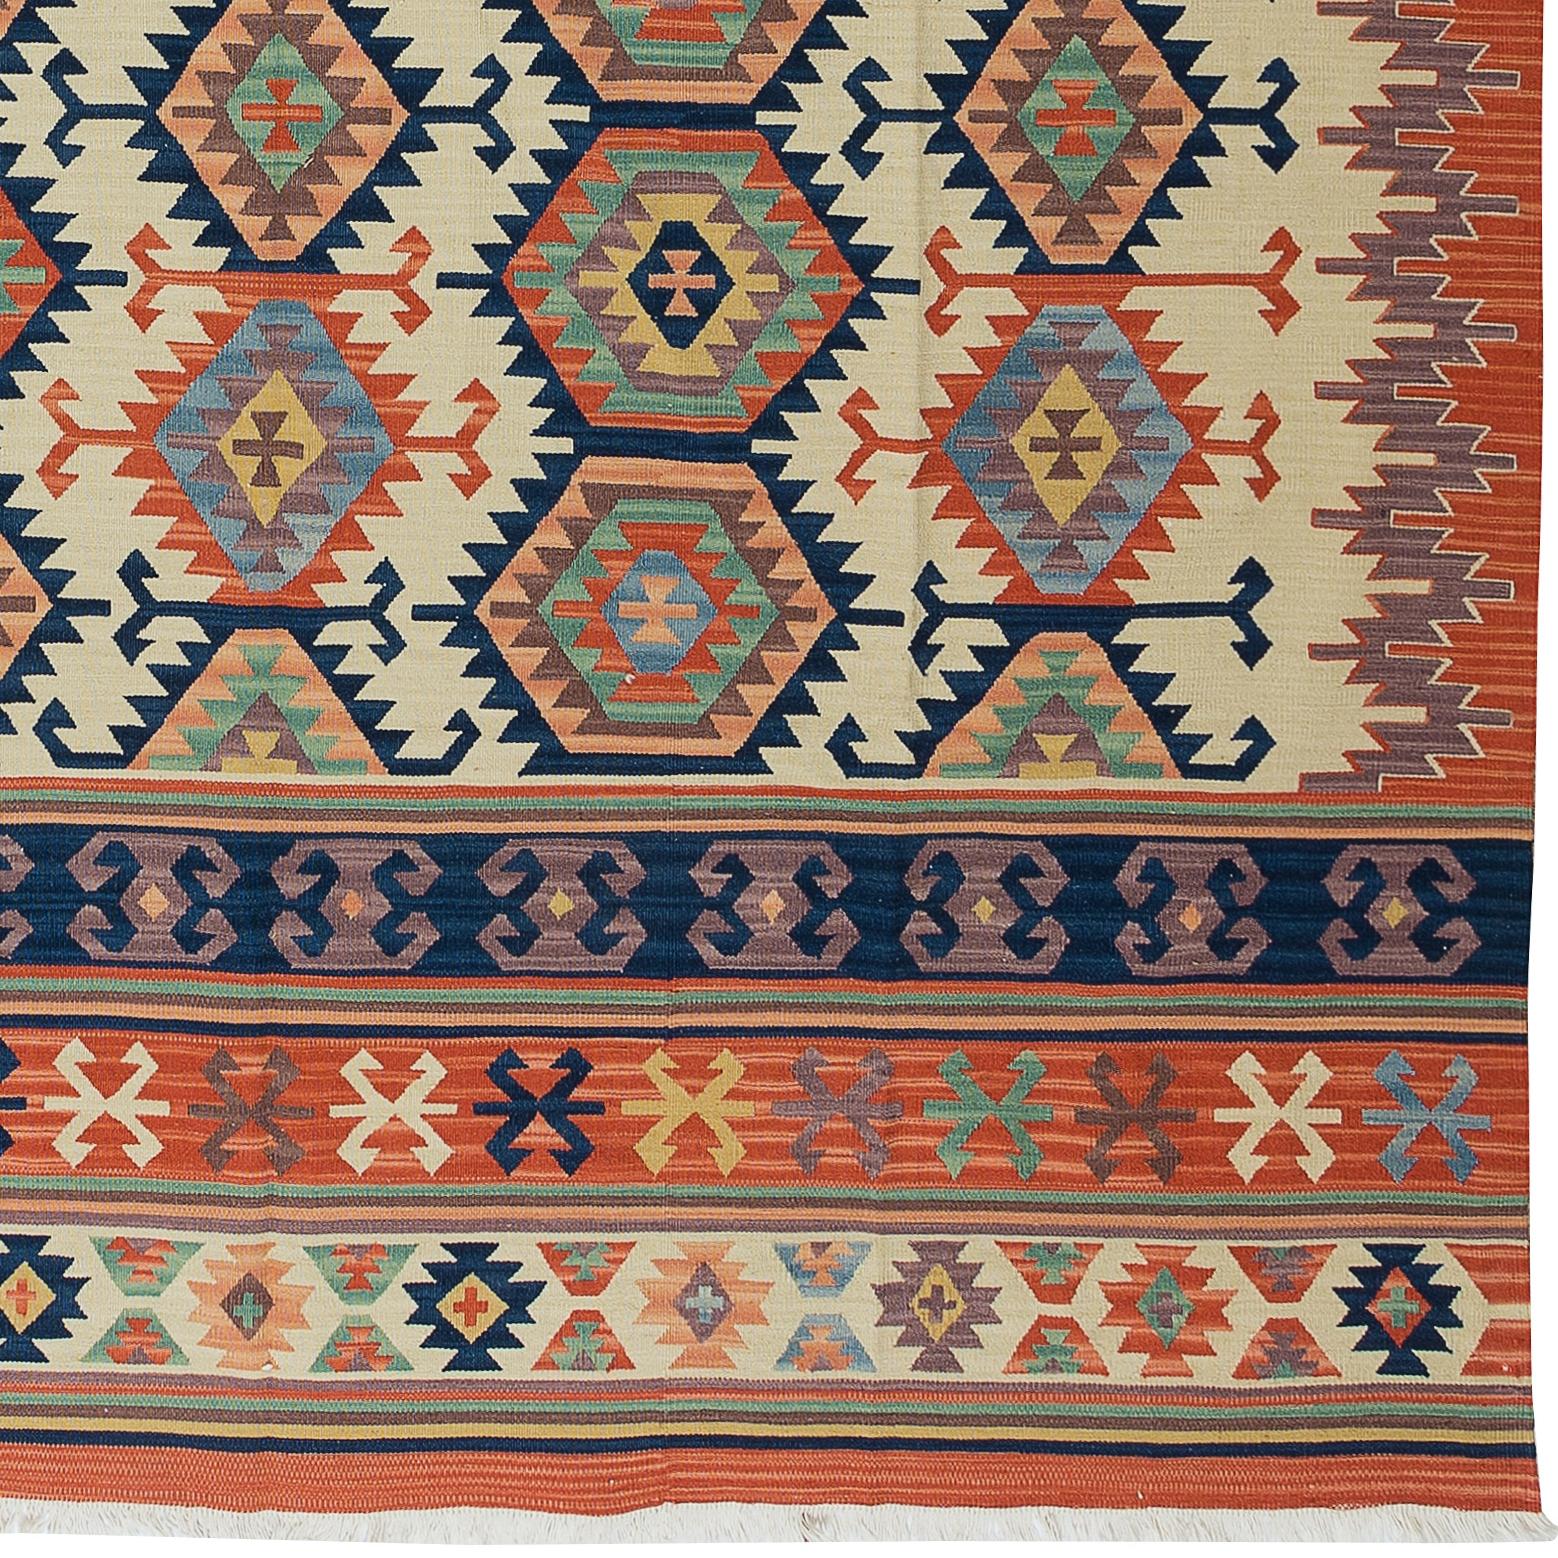 20th Century 6.4x7.8 Ft One of a Kind Vintage Hand-Woven Turkish Kilim 'Flat-Weave', All Wool For Sale